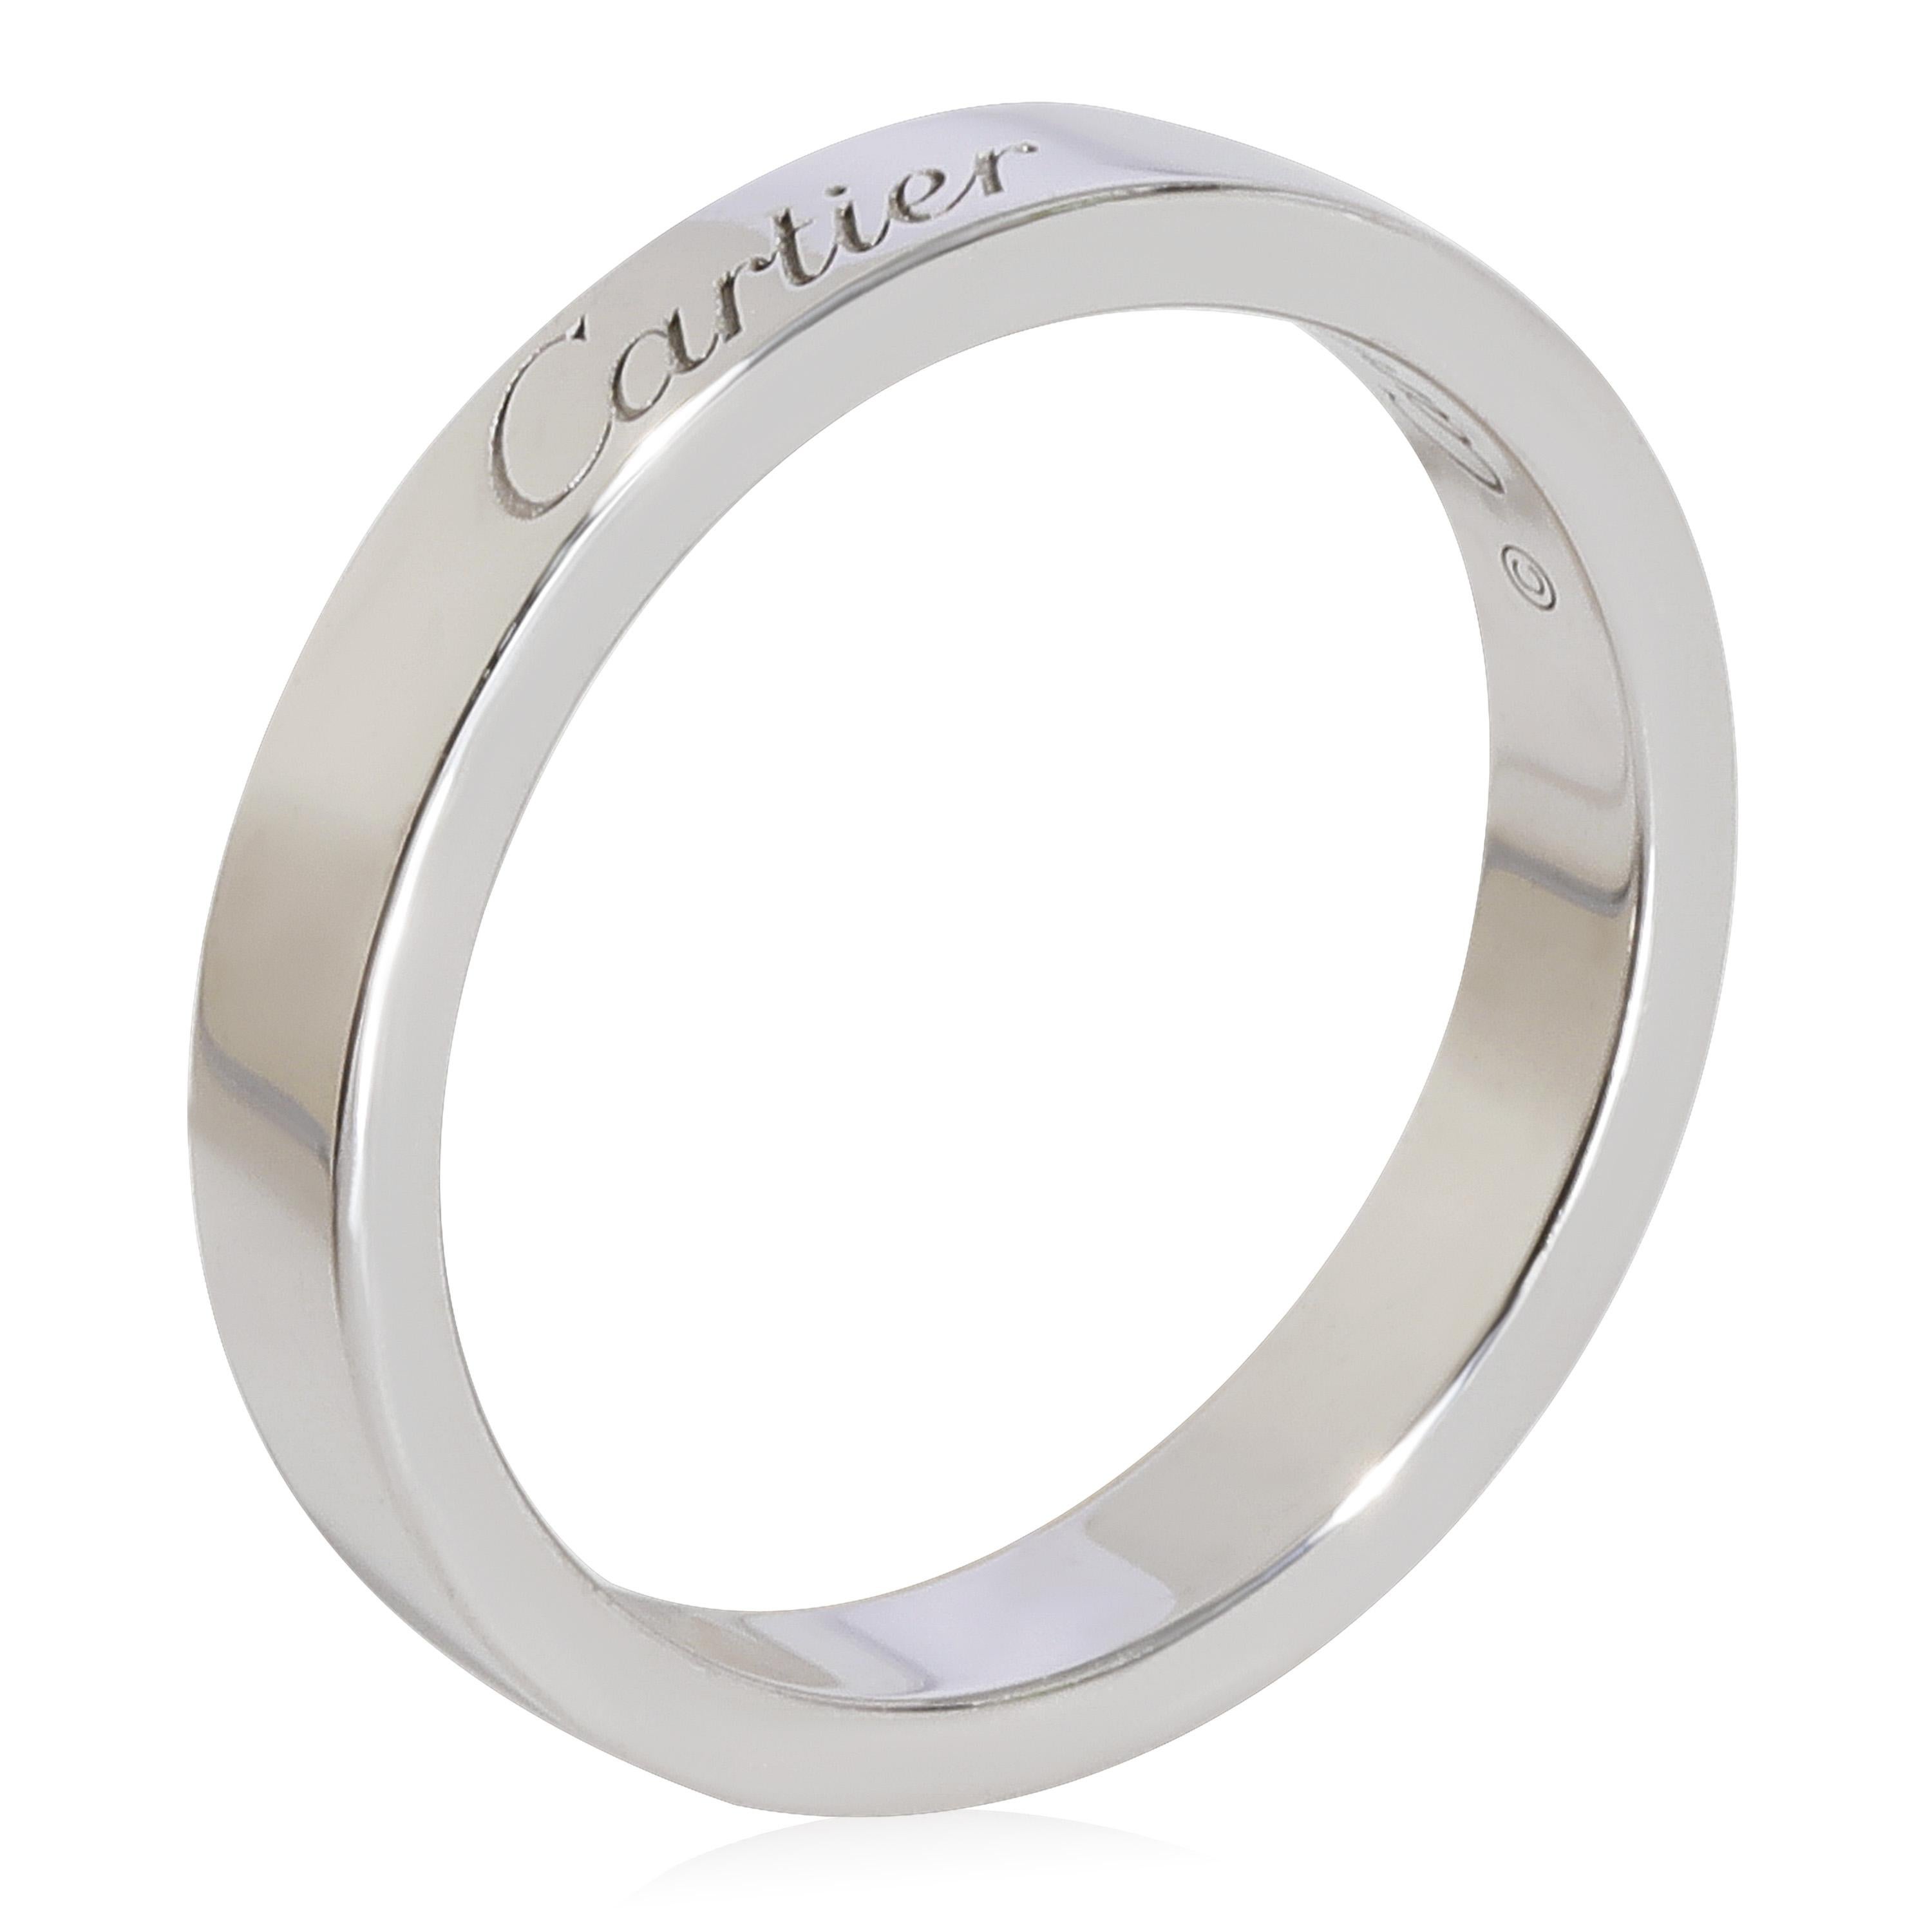 Cartier C De Cartier Wedding Band in Platinum

PRIMARY DETAILS
SKU: 124895
Listing Title: Cartier C De Cartier Wedding Band in Platinum
Condition Description: Retails for 1830 USD. In excellent condition and recently polished. Ring size is 5.25.